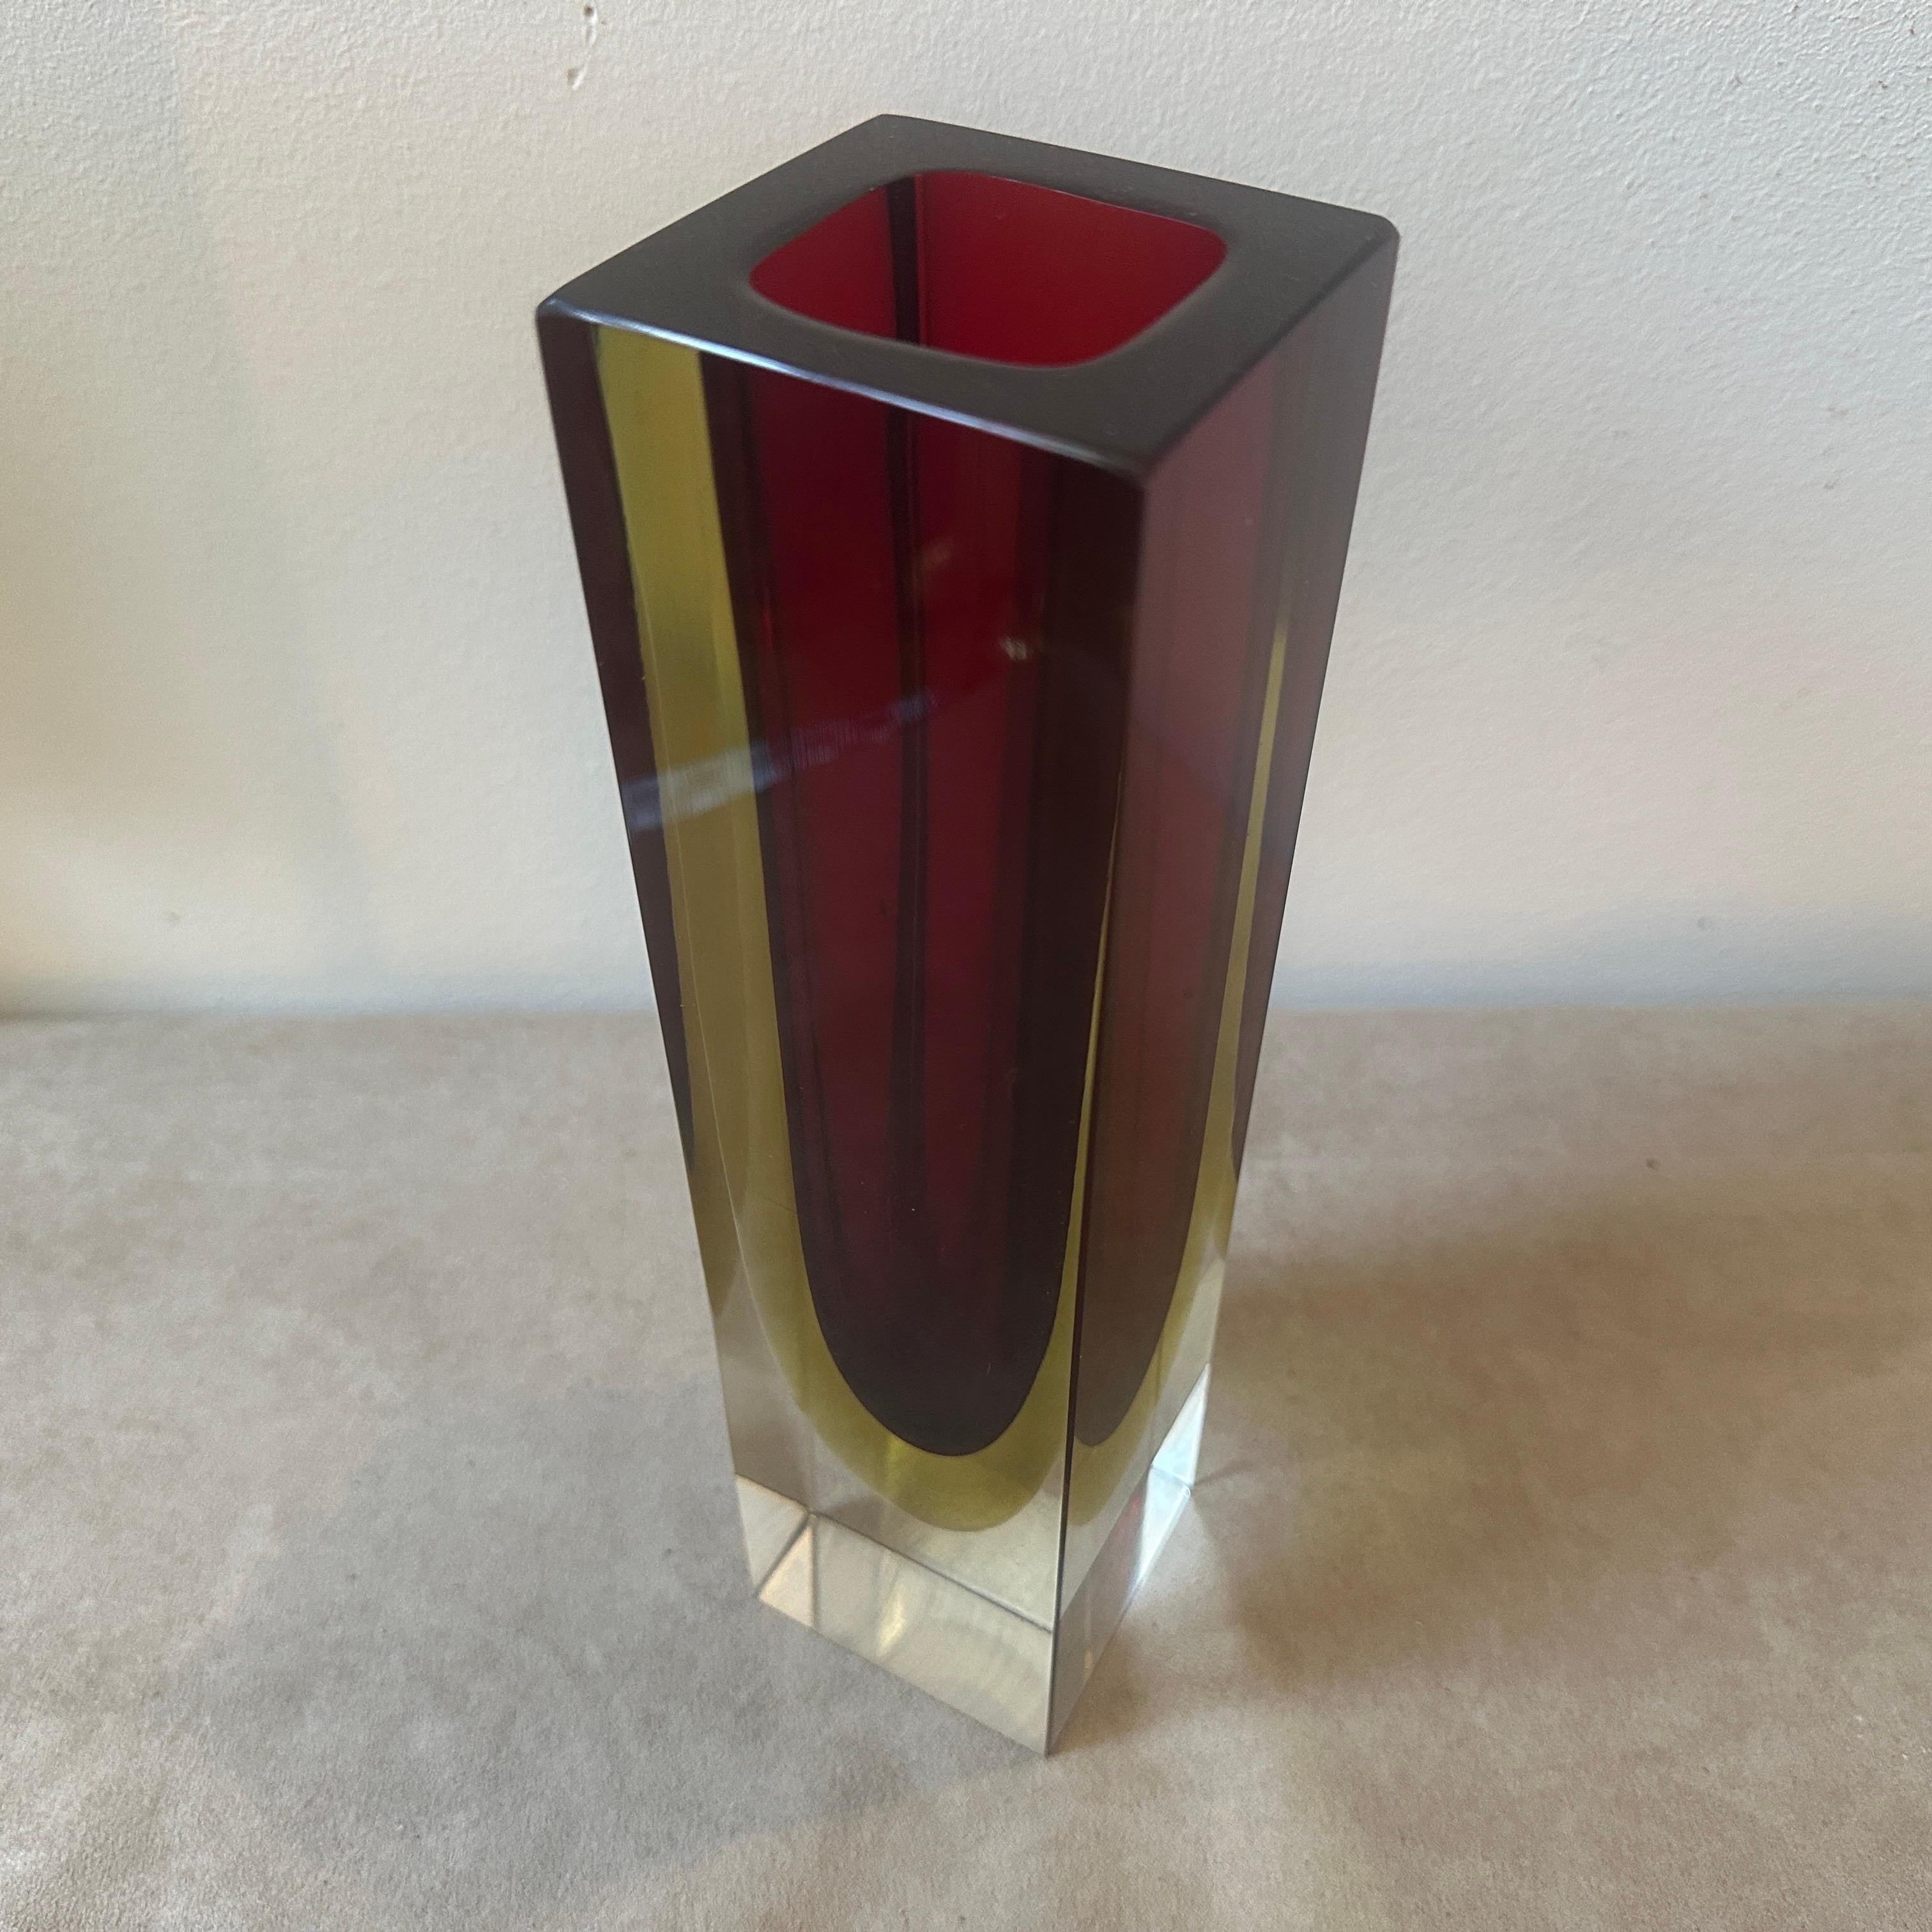 1960s, Modernist Red and Yellow Sommerso Murano Glass Square Vase by Seguso In Good Condition For Sale In Aci Castello, IT